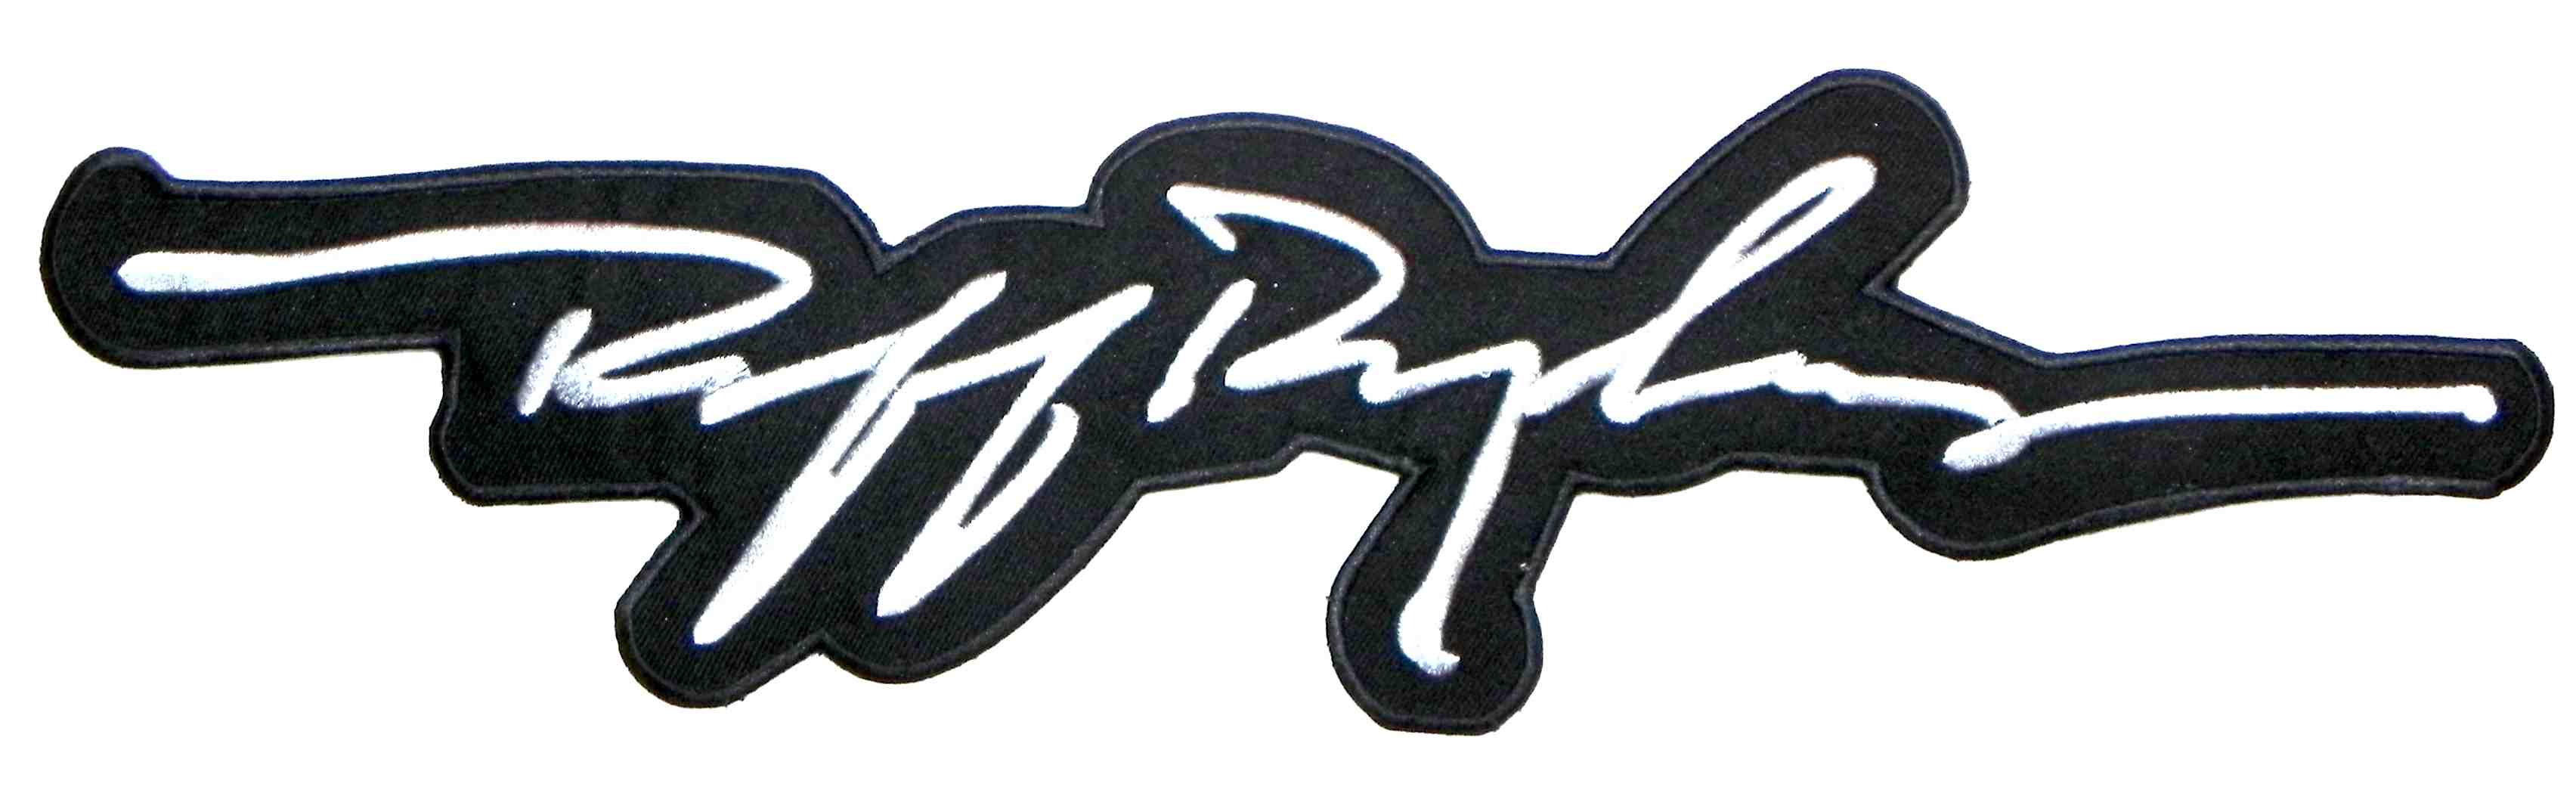 Ruff Ryders Wallpapers 3408x1049